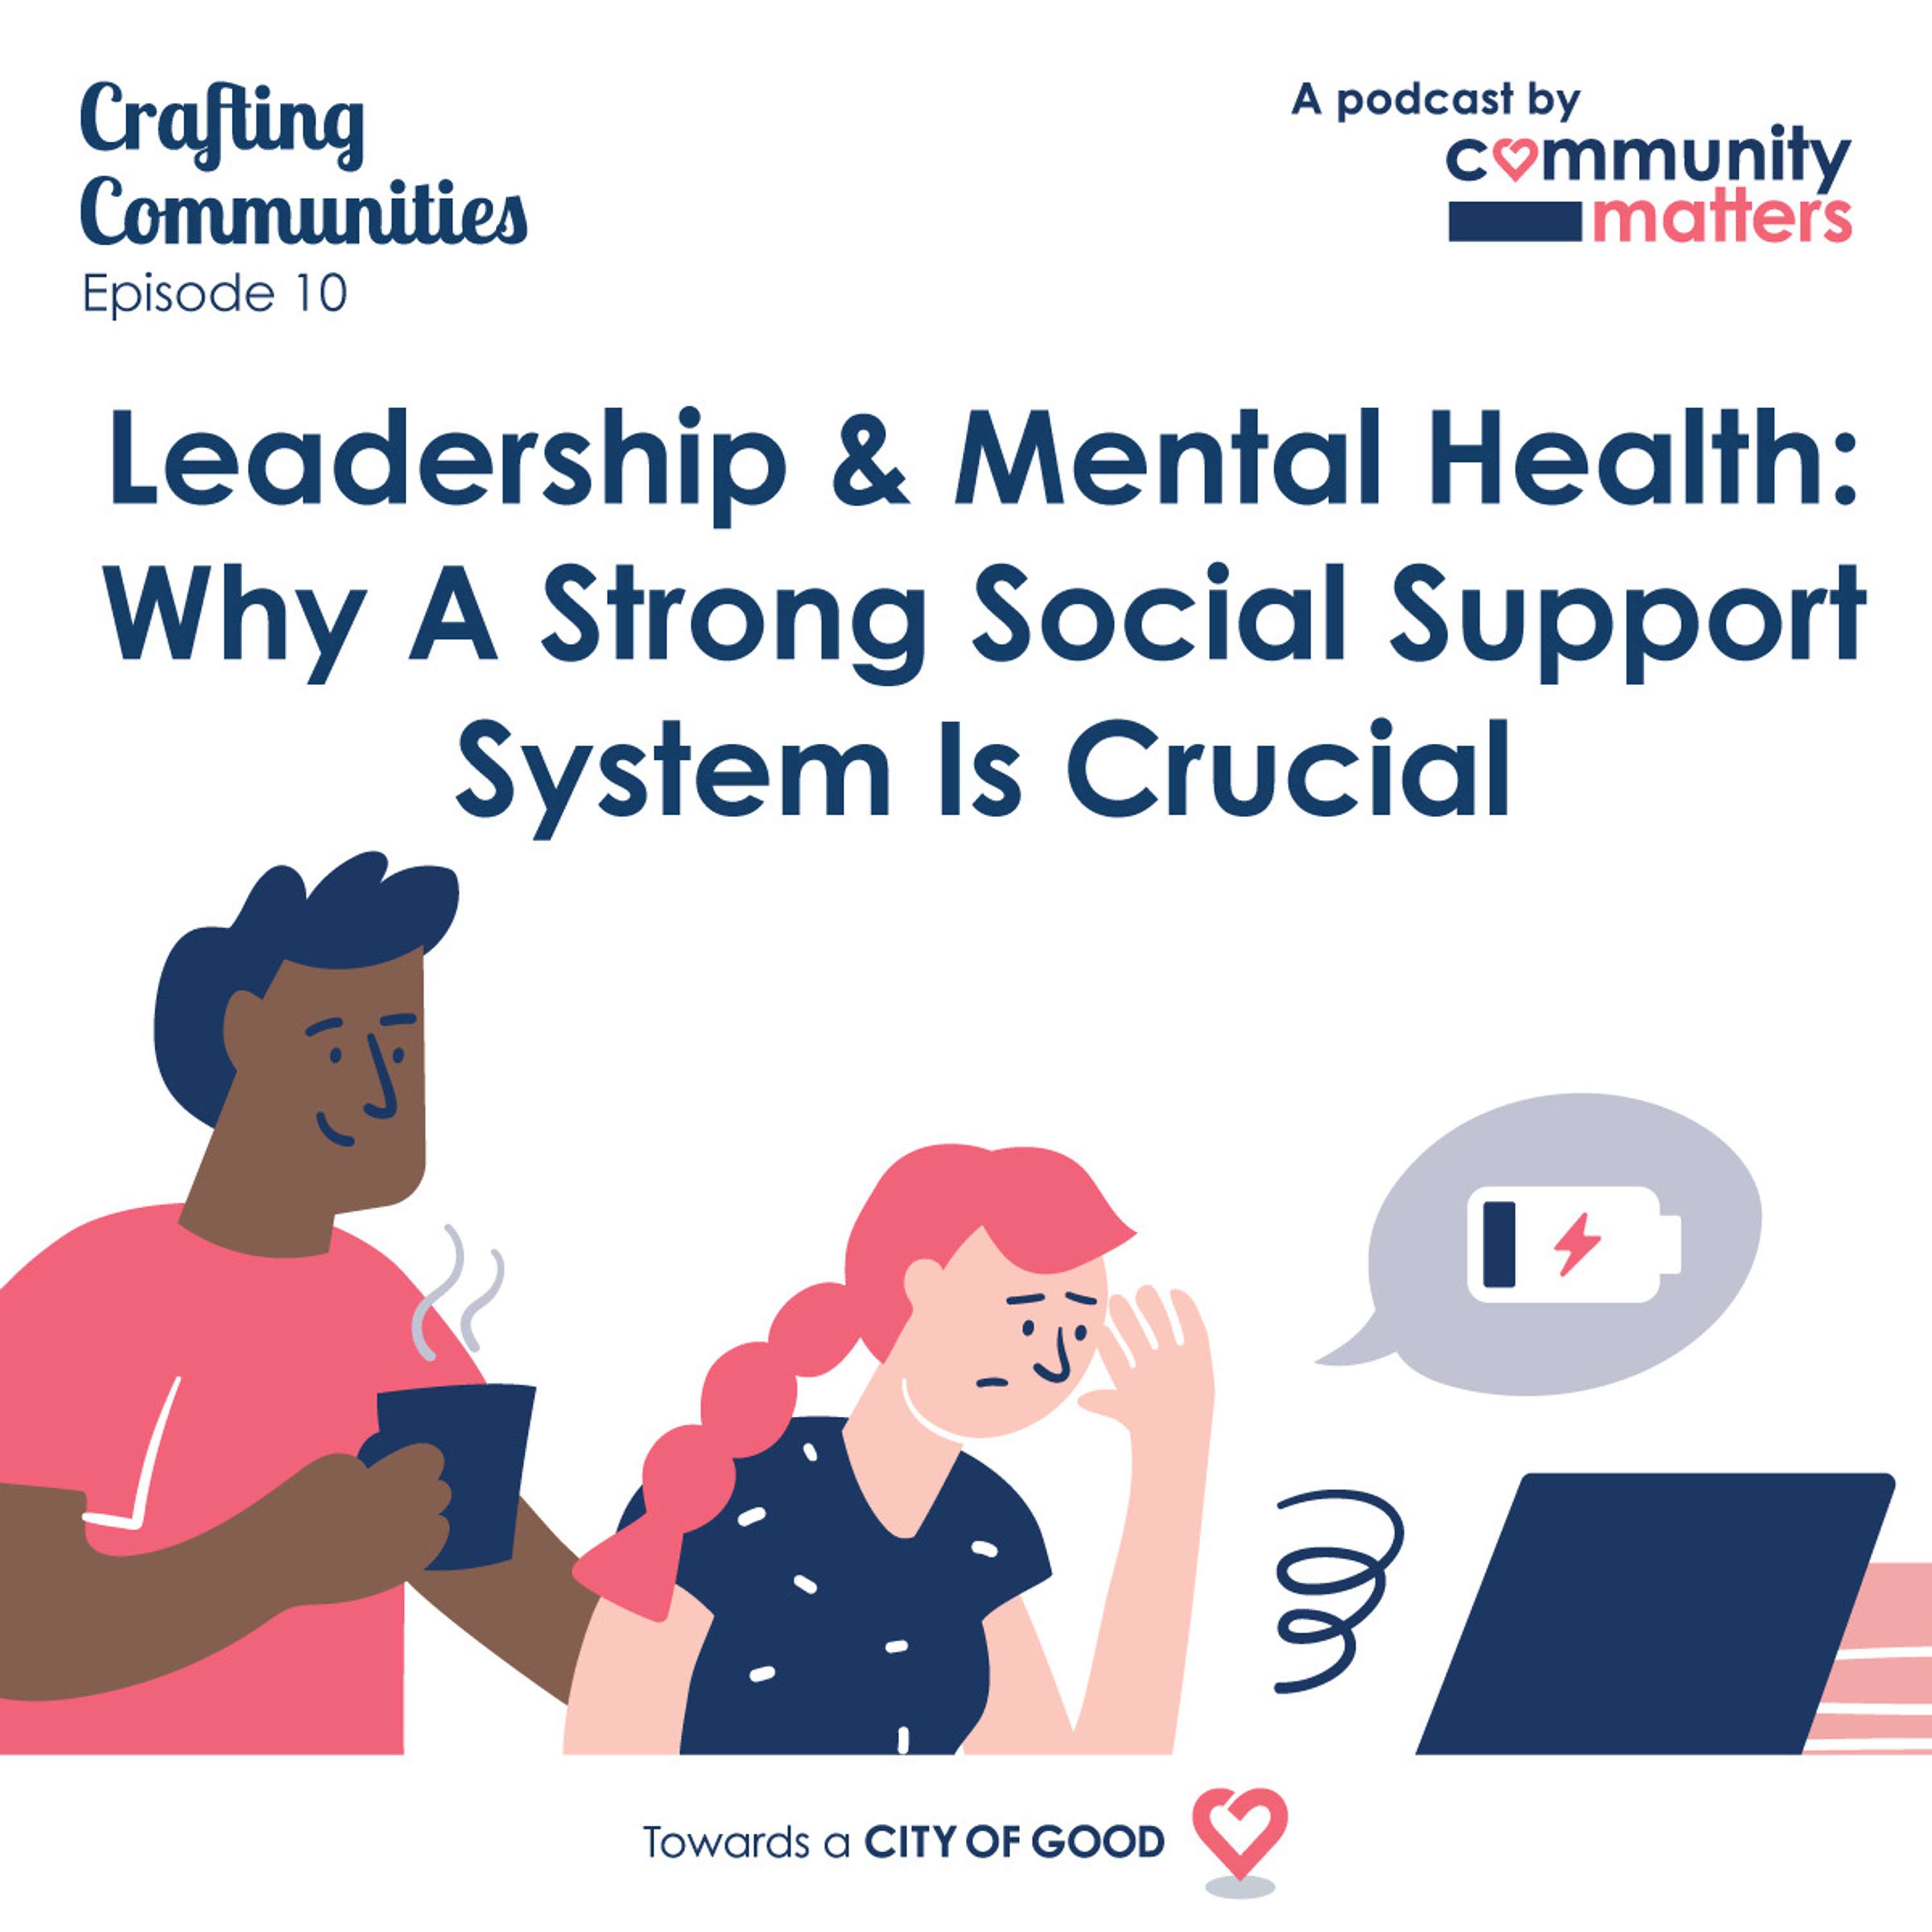 Leadership & Mental Health: Why A Strong Social Support System Is Crucial